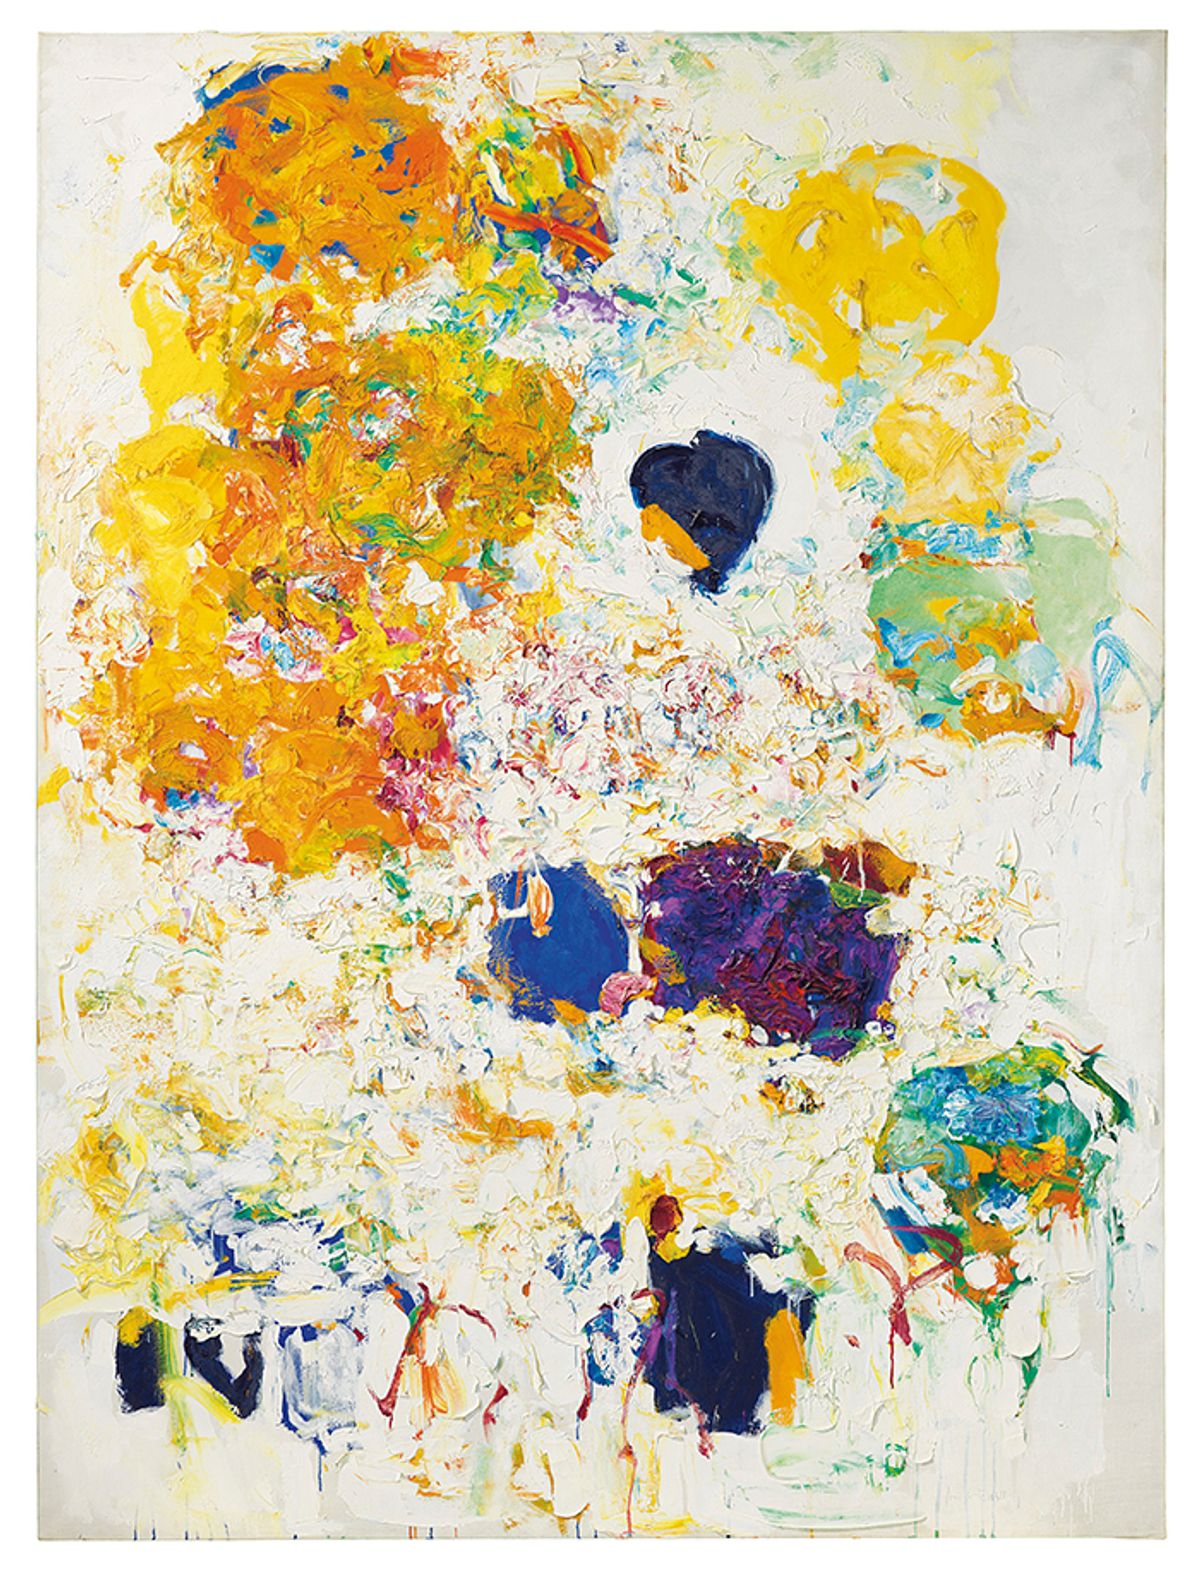 Joan Mitchell's Blueberry (1969), sold at Christie's for $16.6m Courtesy of Christie's Images LTD